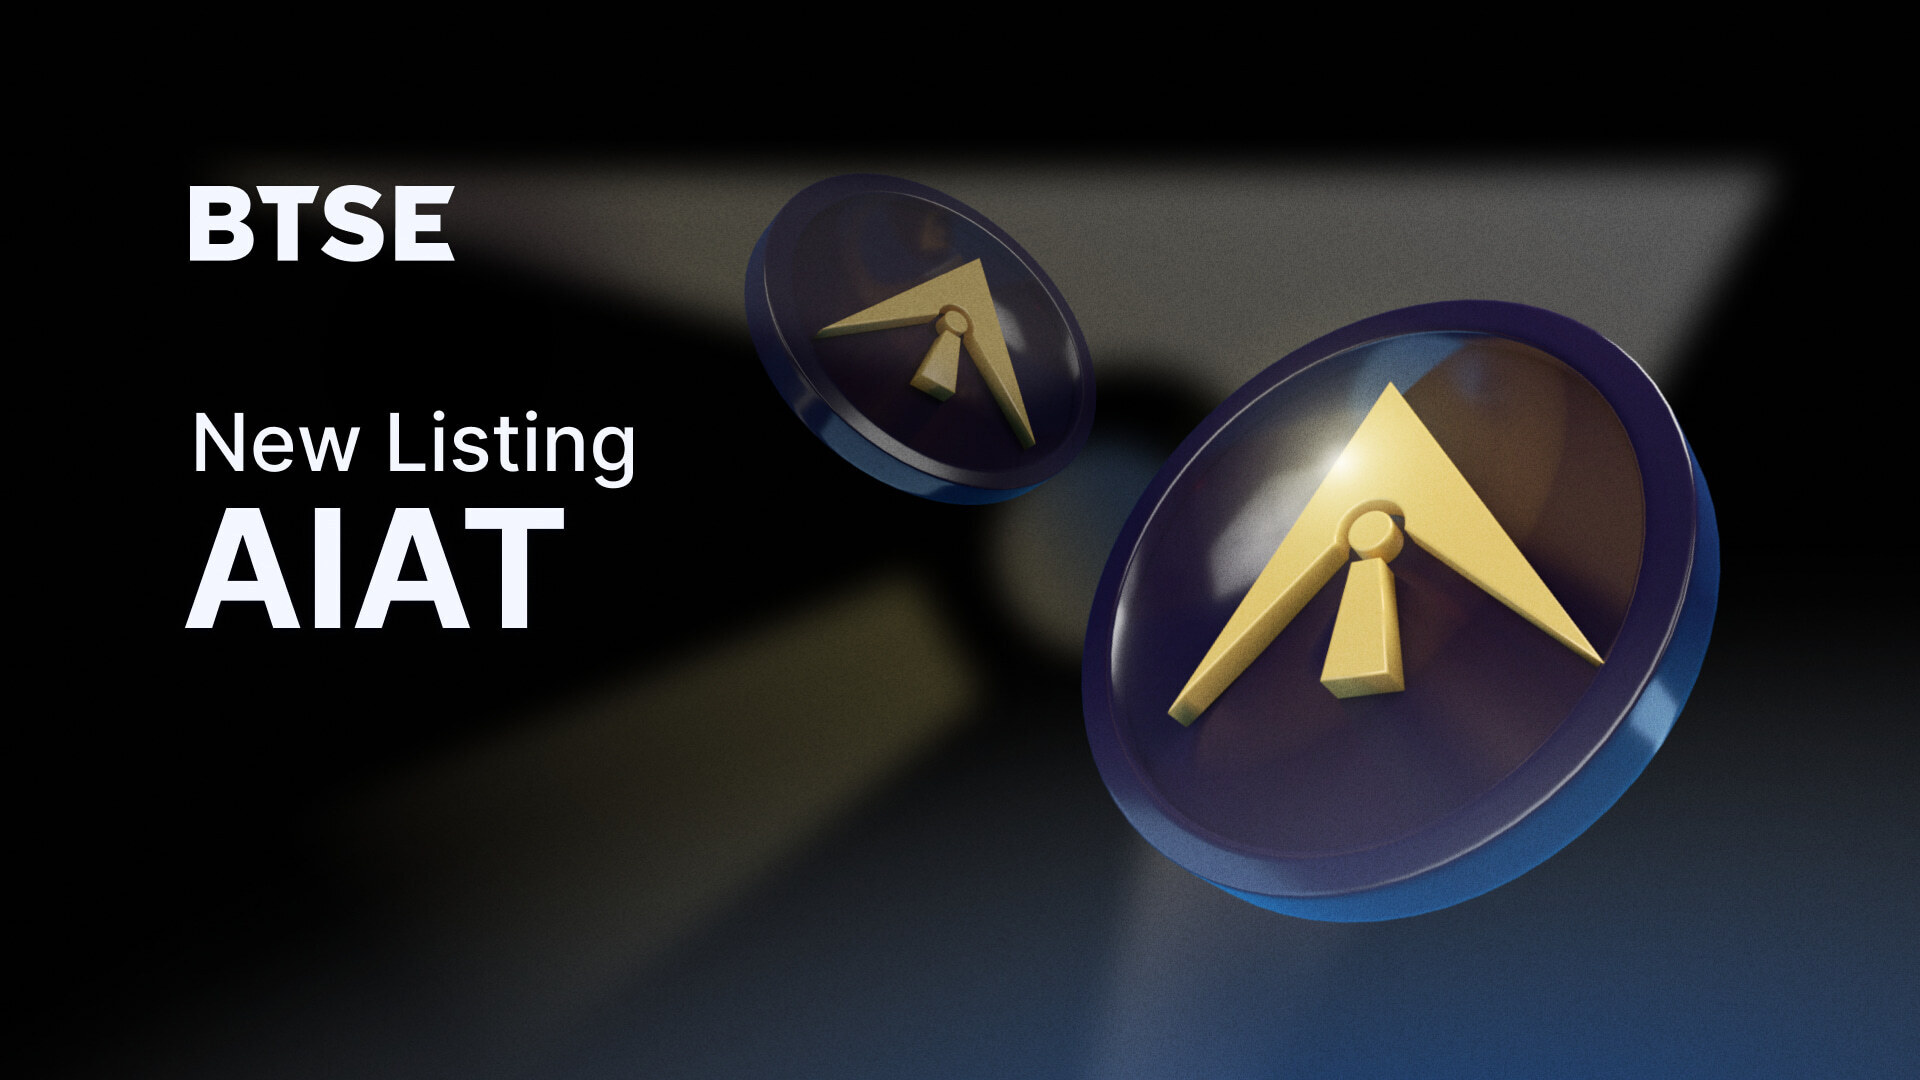 BTSE will list the AI Analysis (AIAT) token on April 1, 2024, making it available for spot trading. Additionally, AIAT will be listed on BTSE’s wider ecosystem of 20+ white label crypto exchanges, enabling better liquidity and pricing. Users will be able to trade AIAT via the AIAT/USDT and AIAT/USDC trading pairs. 